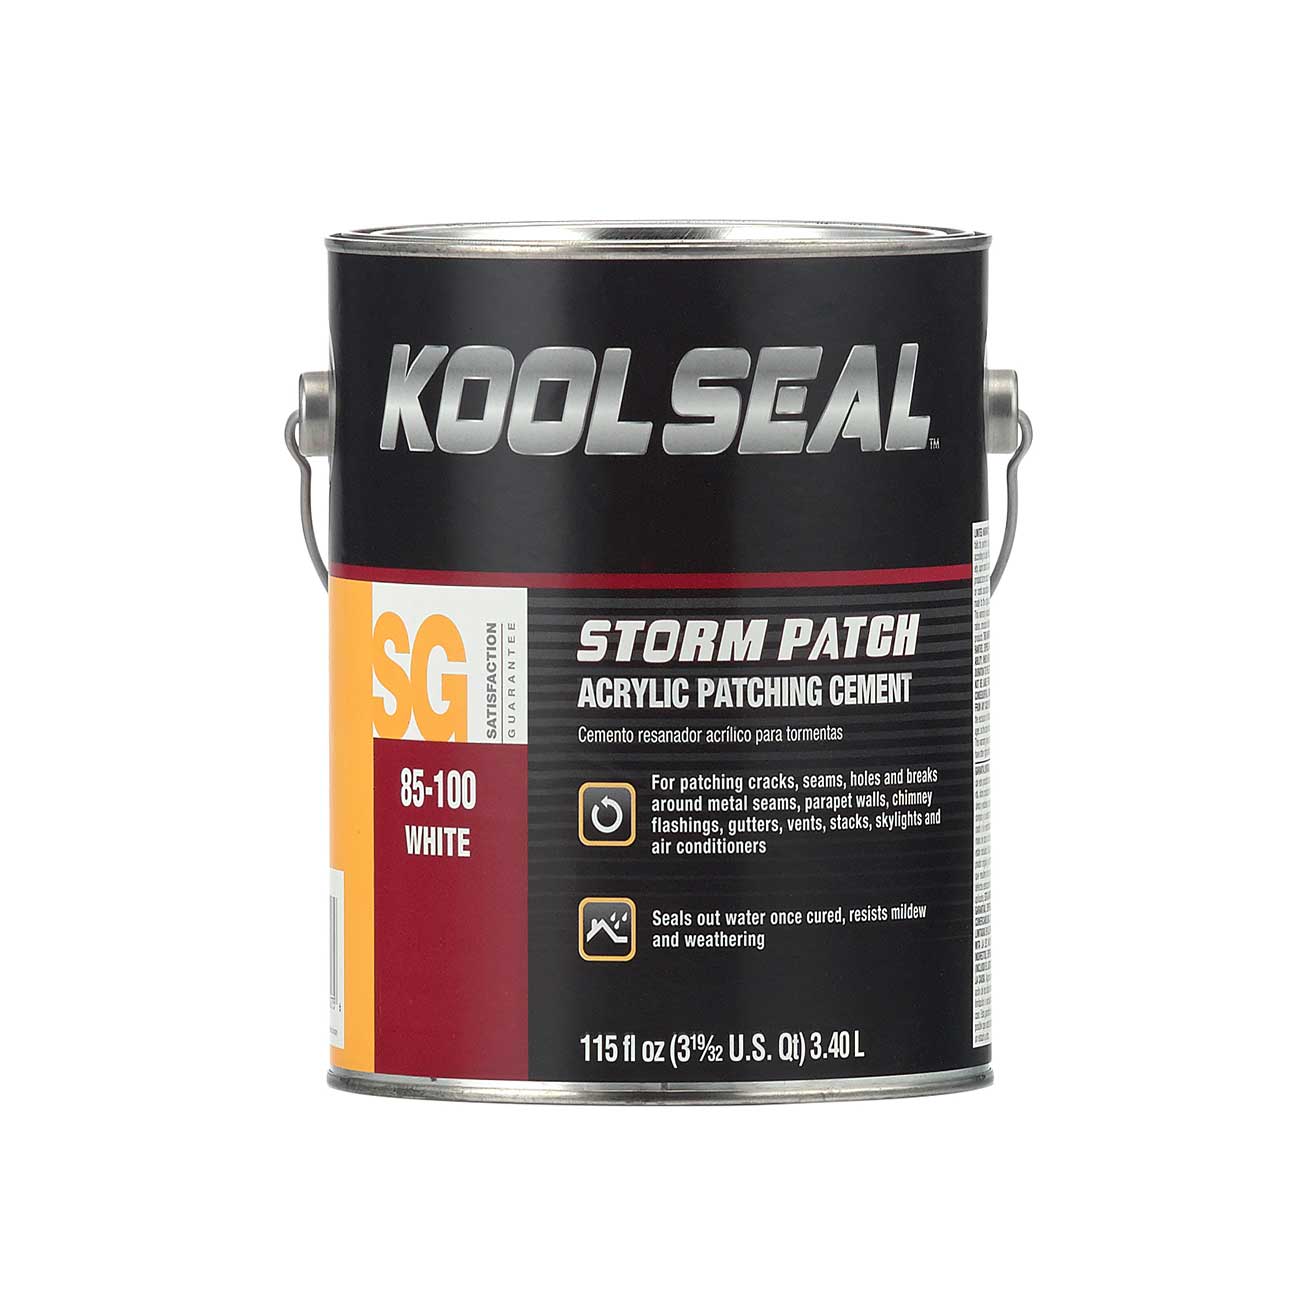 Kool Seal SP Acrylic Patching Cement